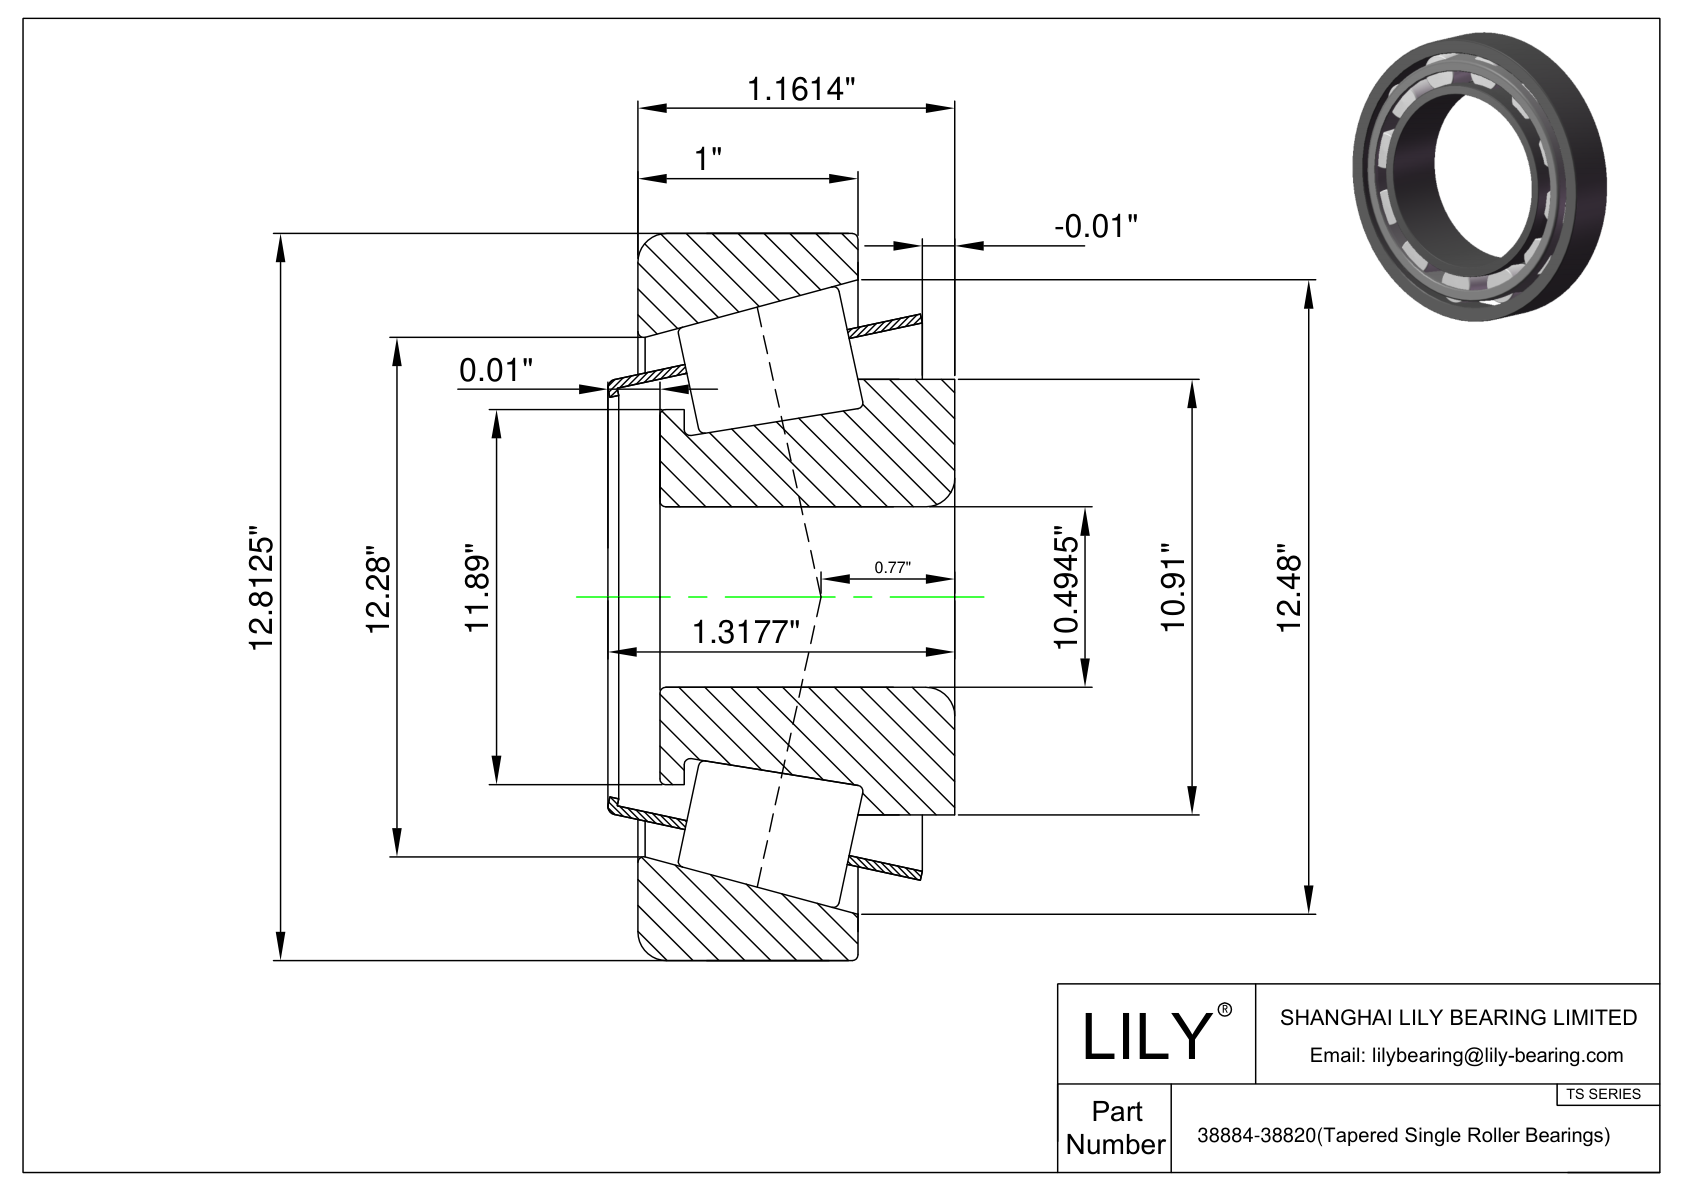 38884-38820 TS (Tapered Single Roller Bearings) (Imperial) cad drawing